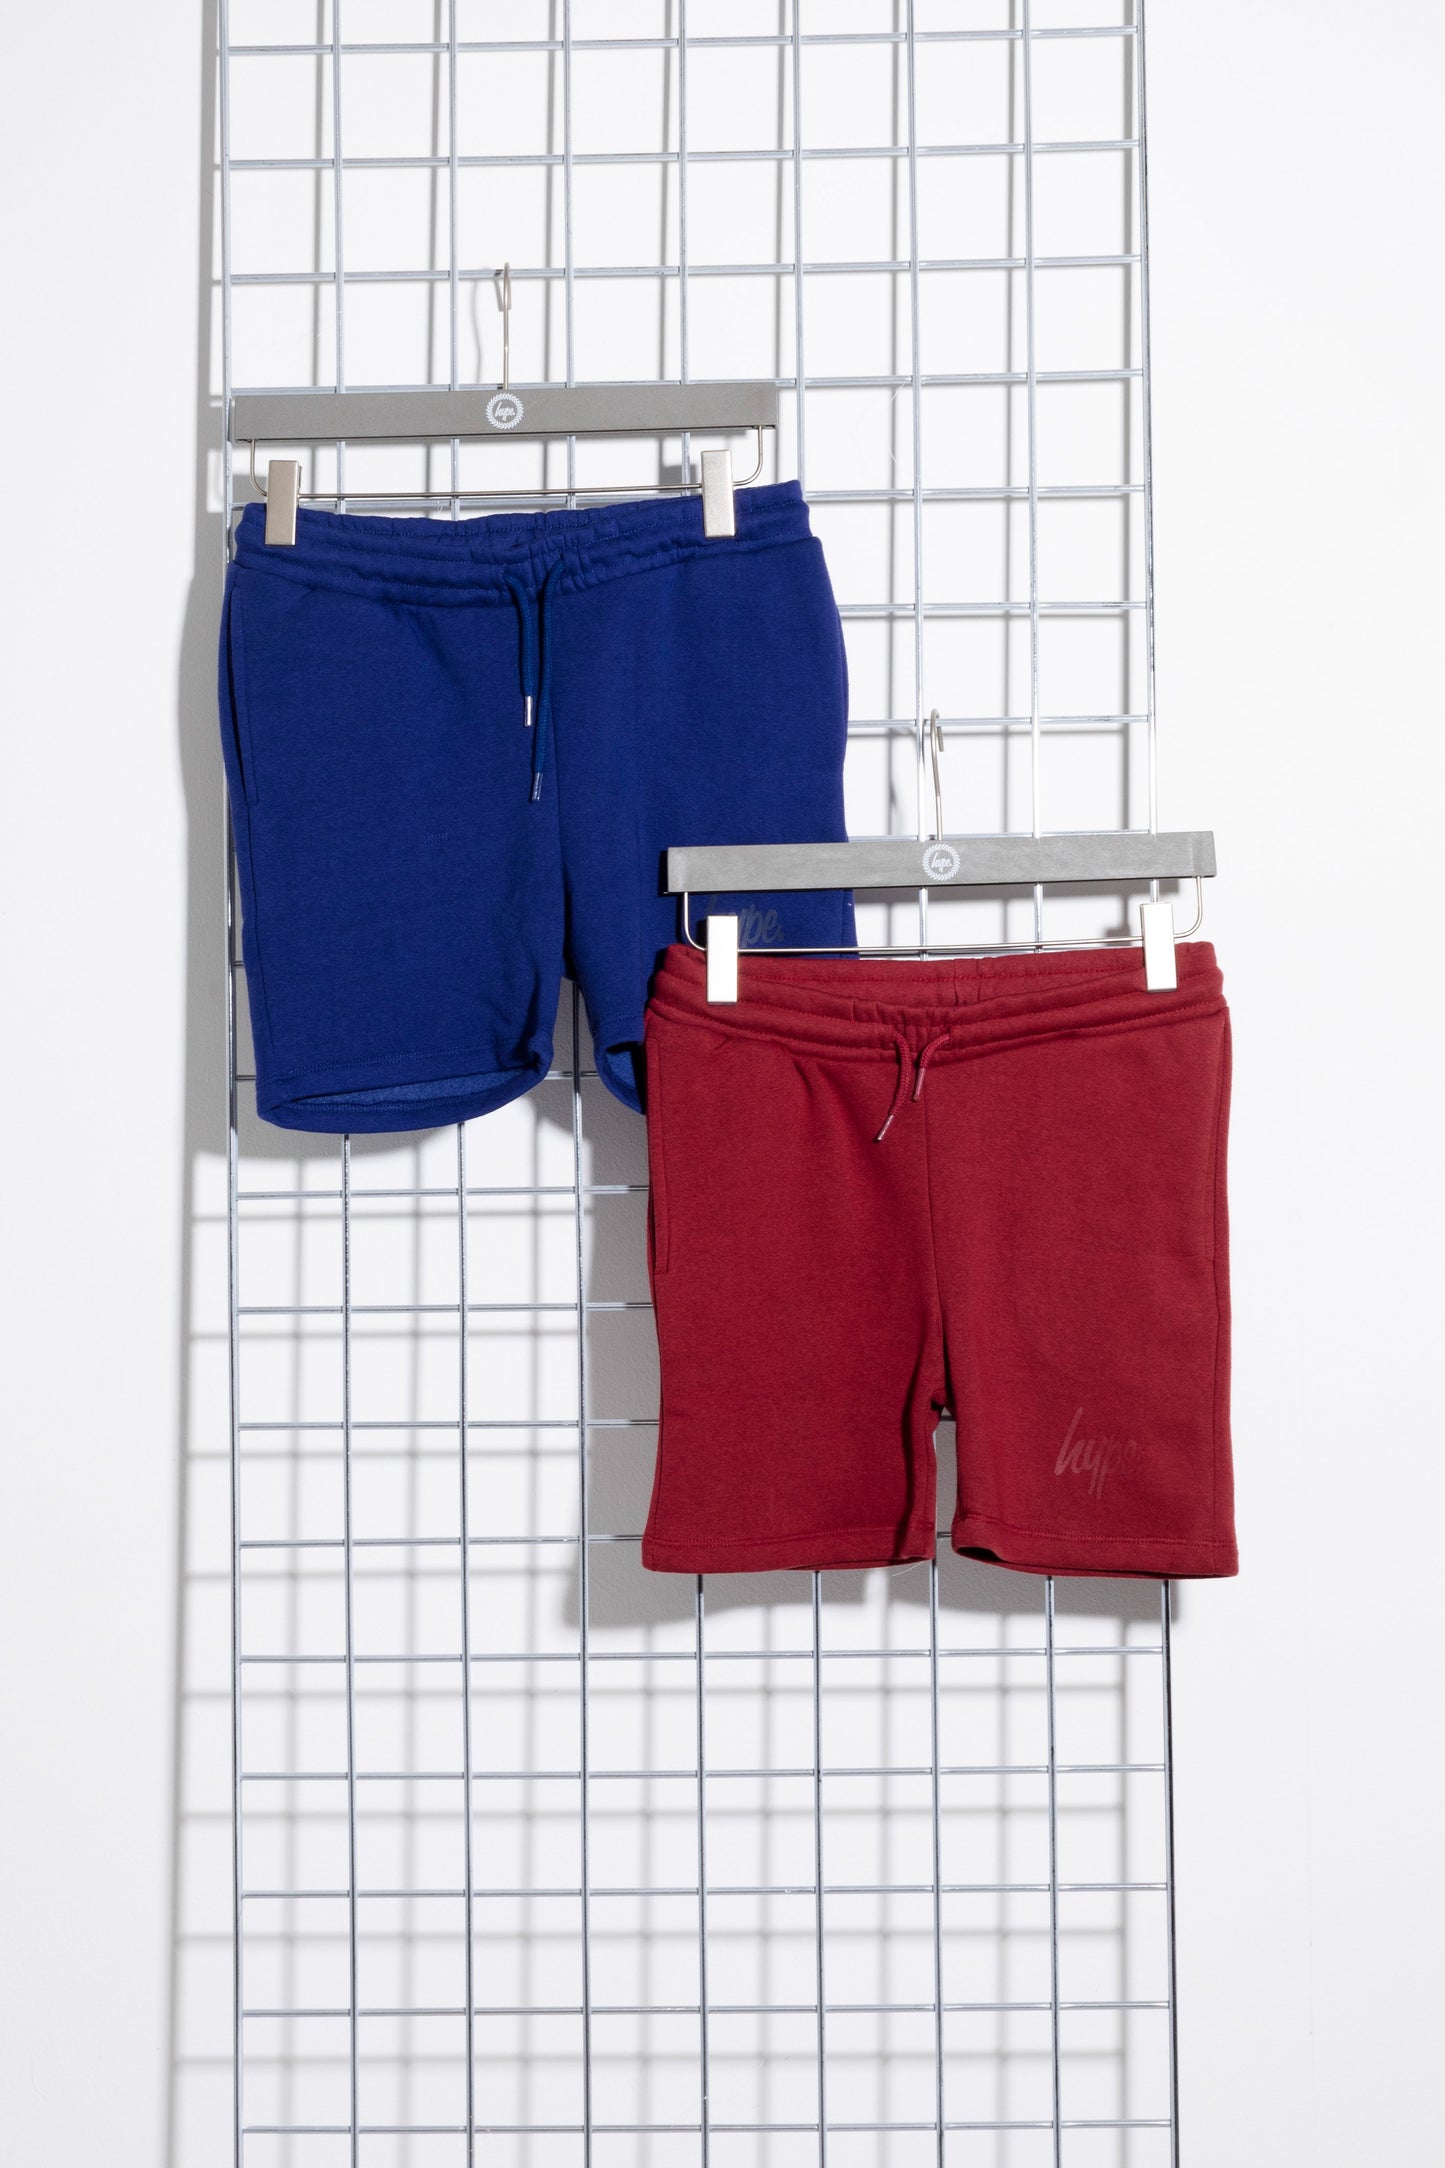 Hype Two Pack Navy & Burgundy Kids Shorts